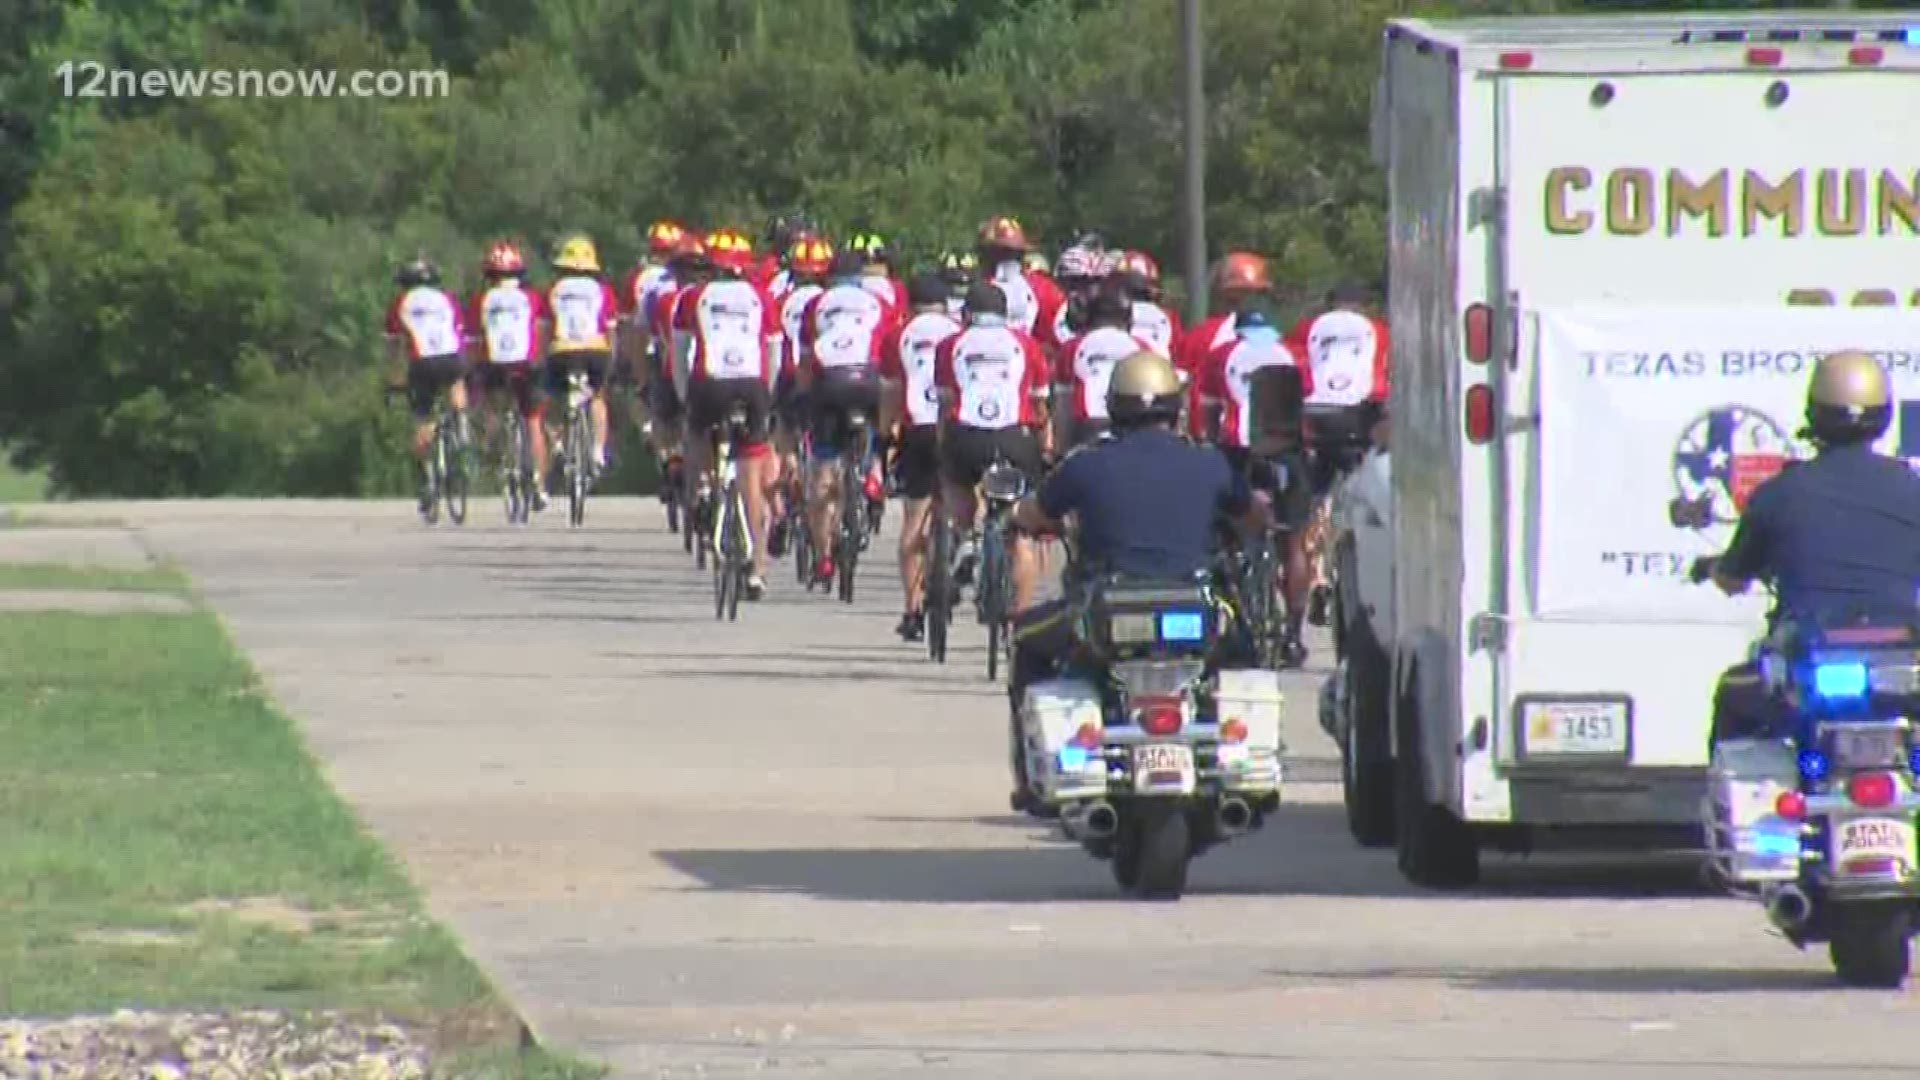 The Texas Brotherhood Ride, a long distance bike ride raising money for fallen first responders, stops in Deweyville on their way to San Antonio.